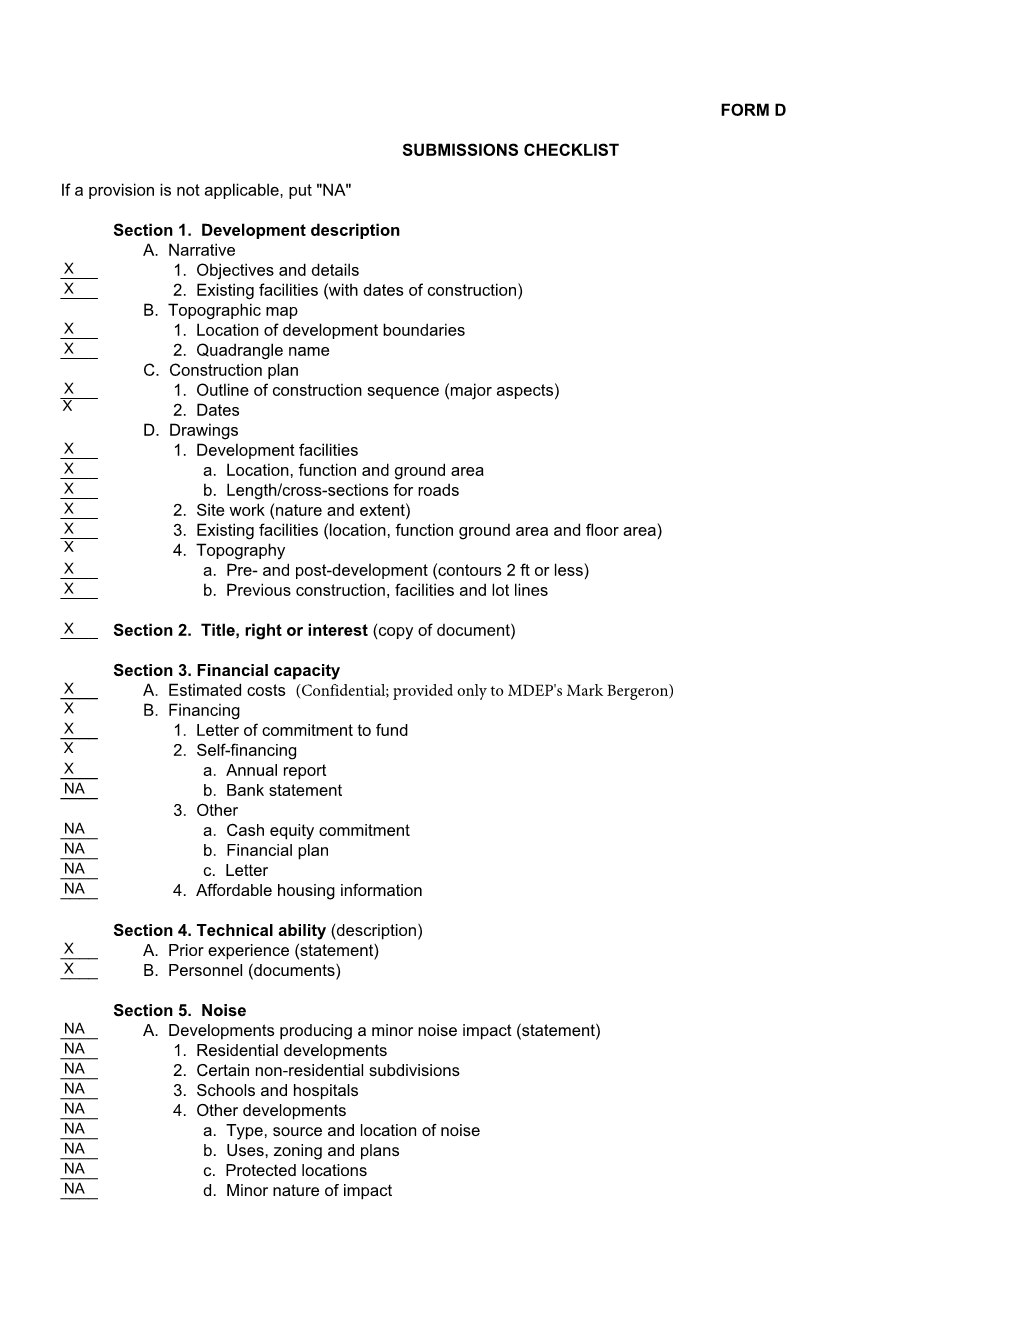 FORM D SUBMISSIONS CHECKLIST If a Provision Is Not